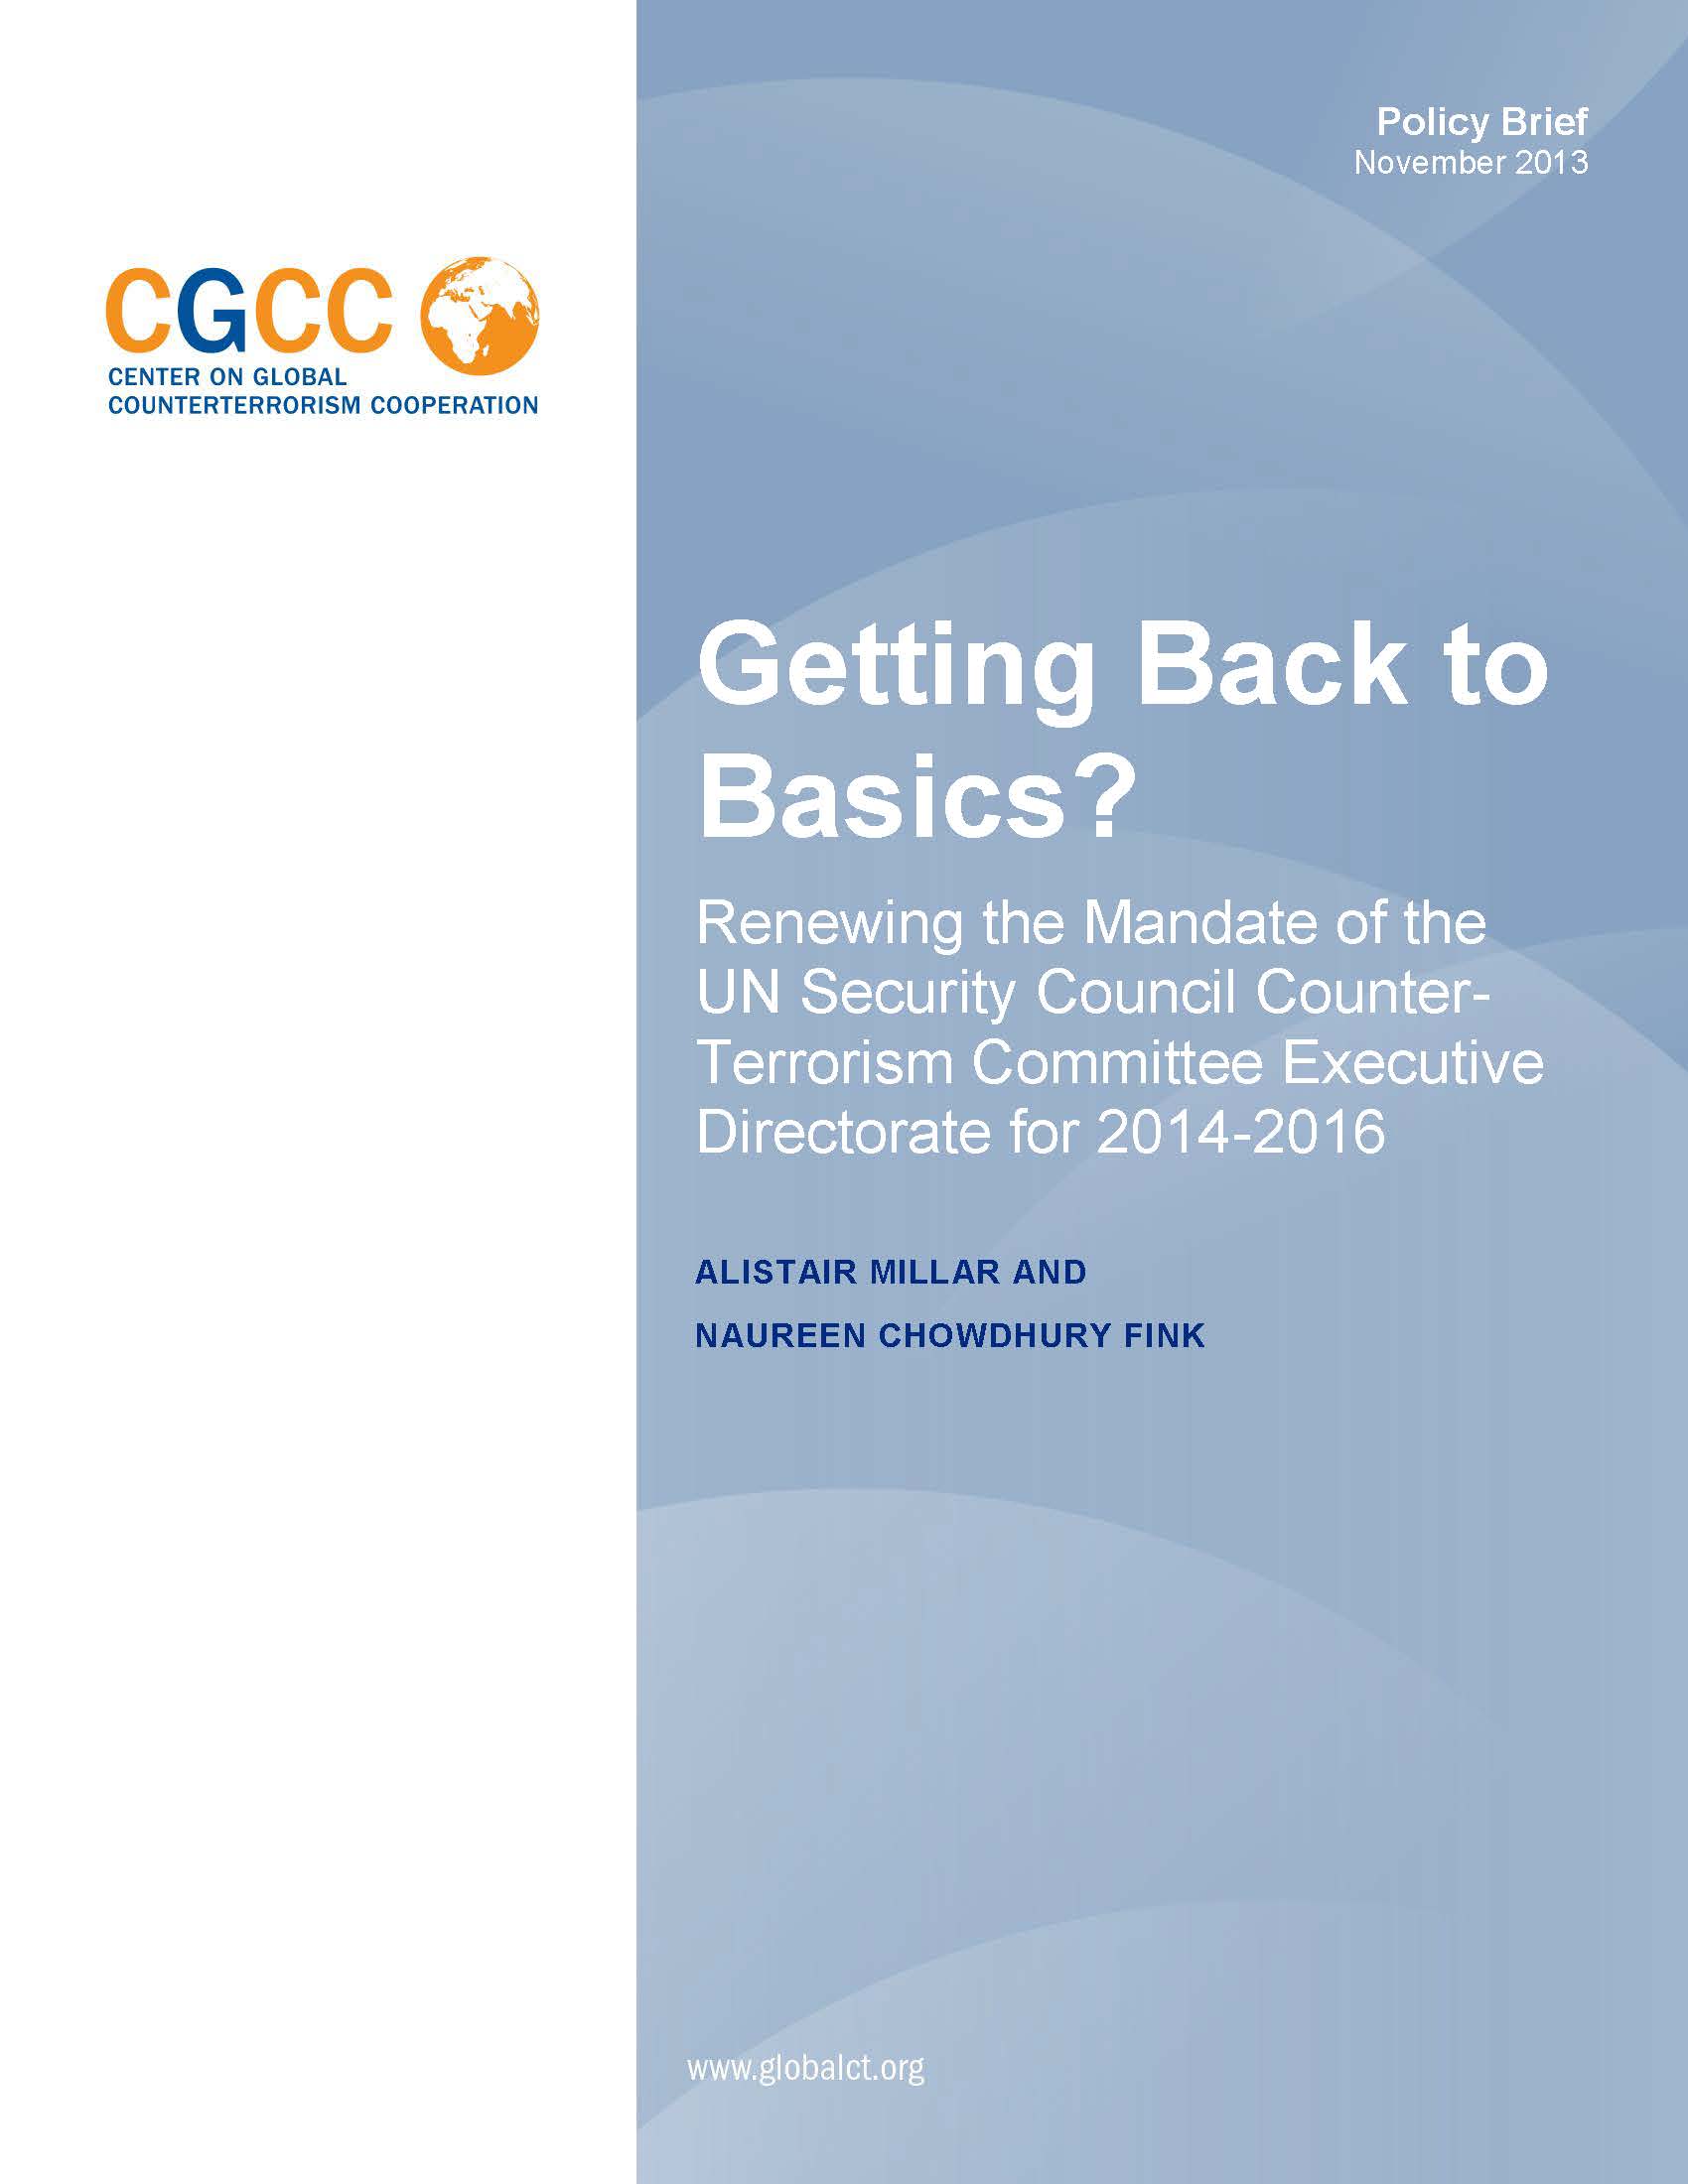 Getting Back to Basics?: Renewing the Mandate of the UN Security Council Counter-Terrorism Committee Executive Directorate for 2014-2016